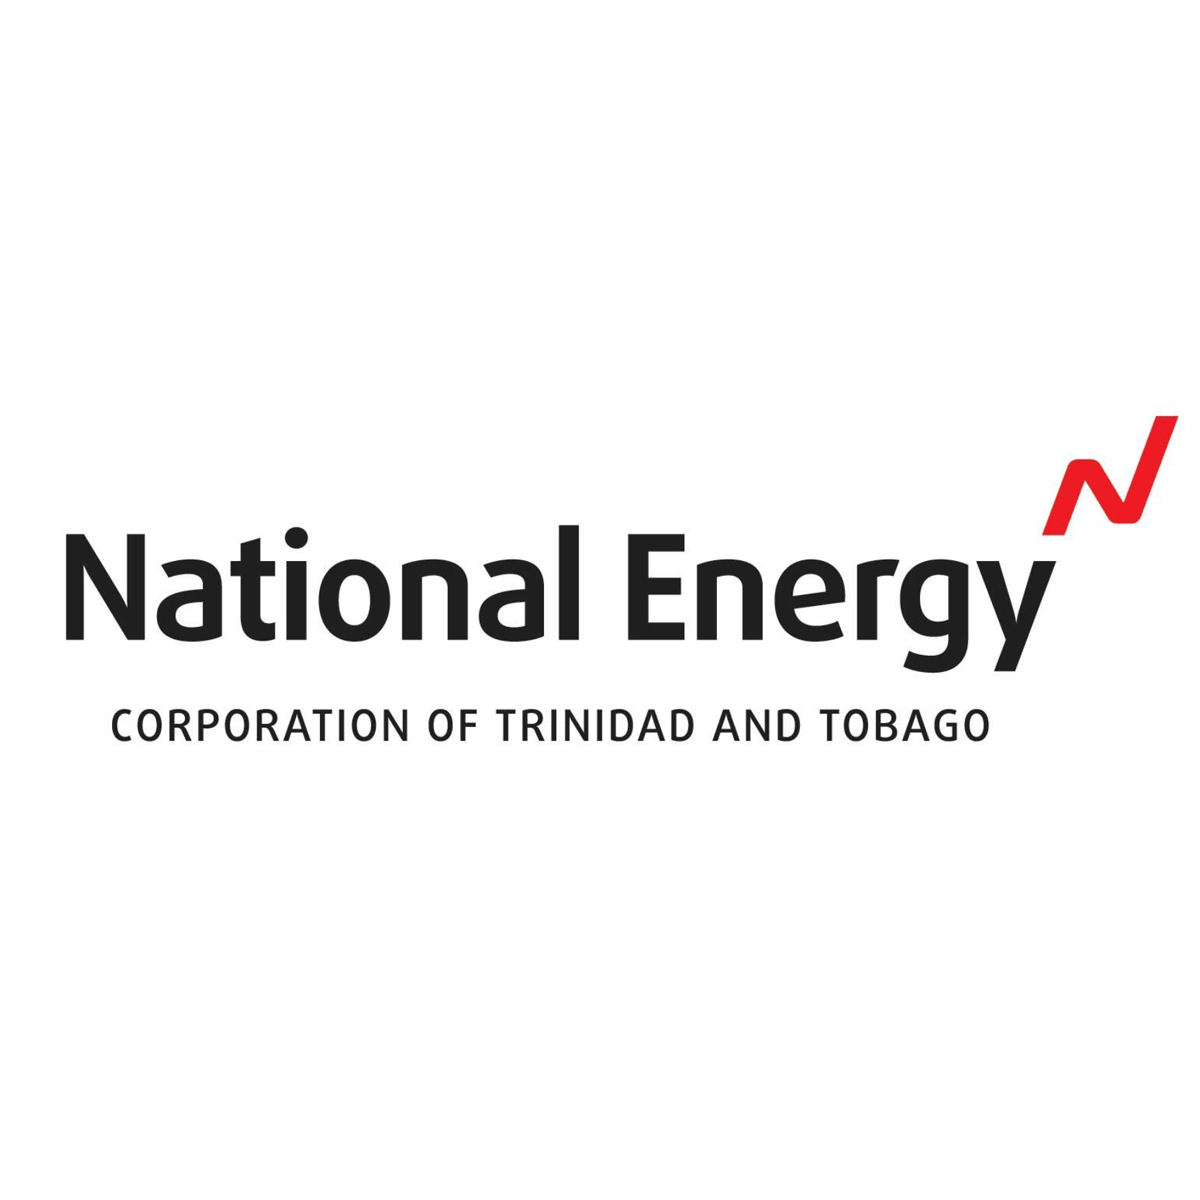 NATIONAL ENERGY CORPORATION OF TRINIDAD AND TOBAGO LIMITED (NATIONAL ENERGY)